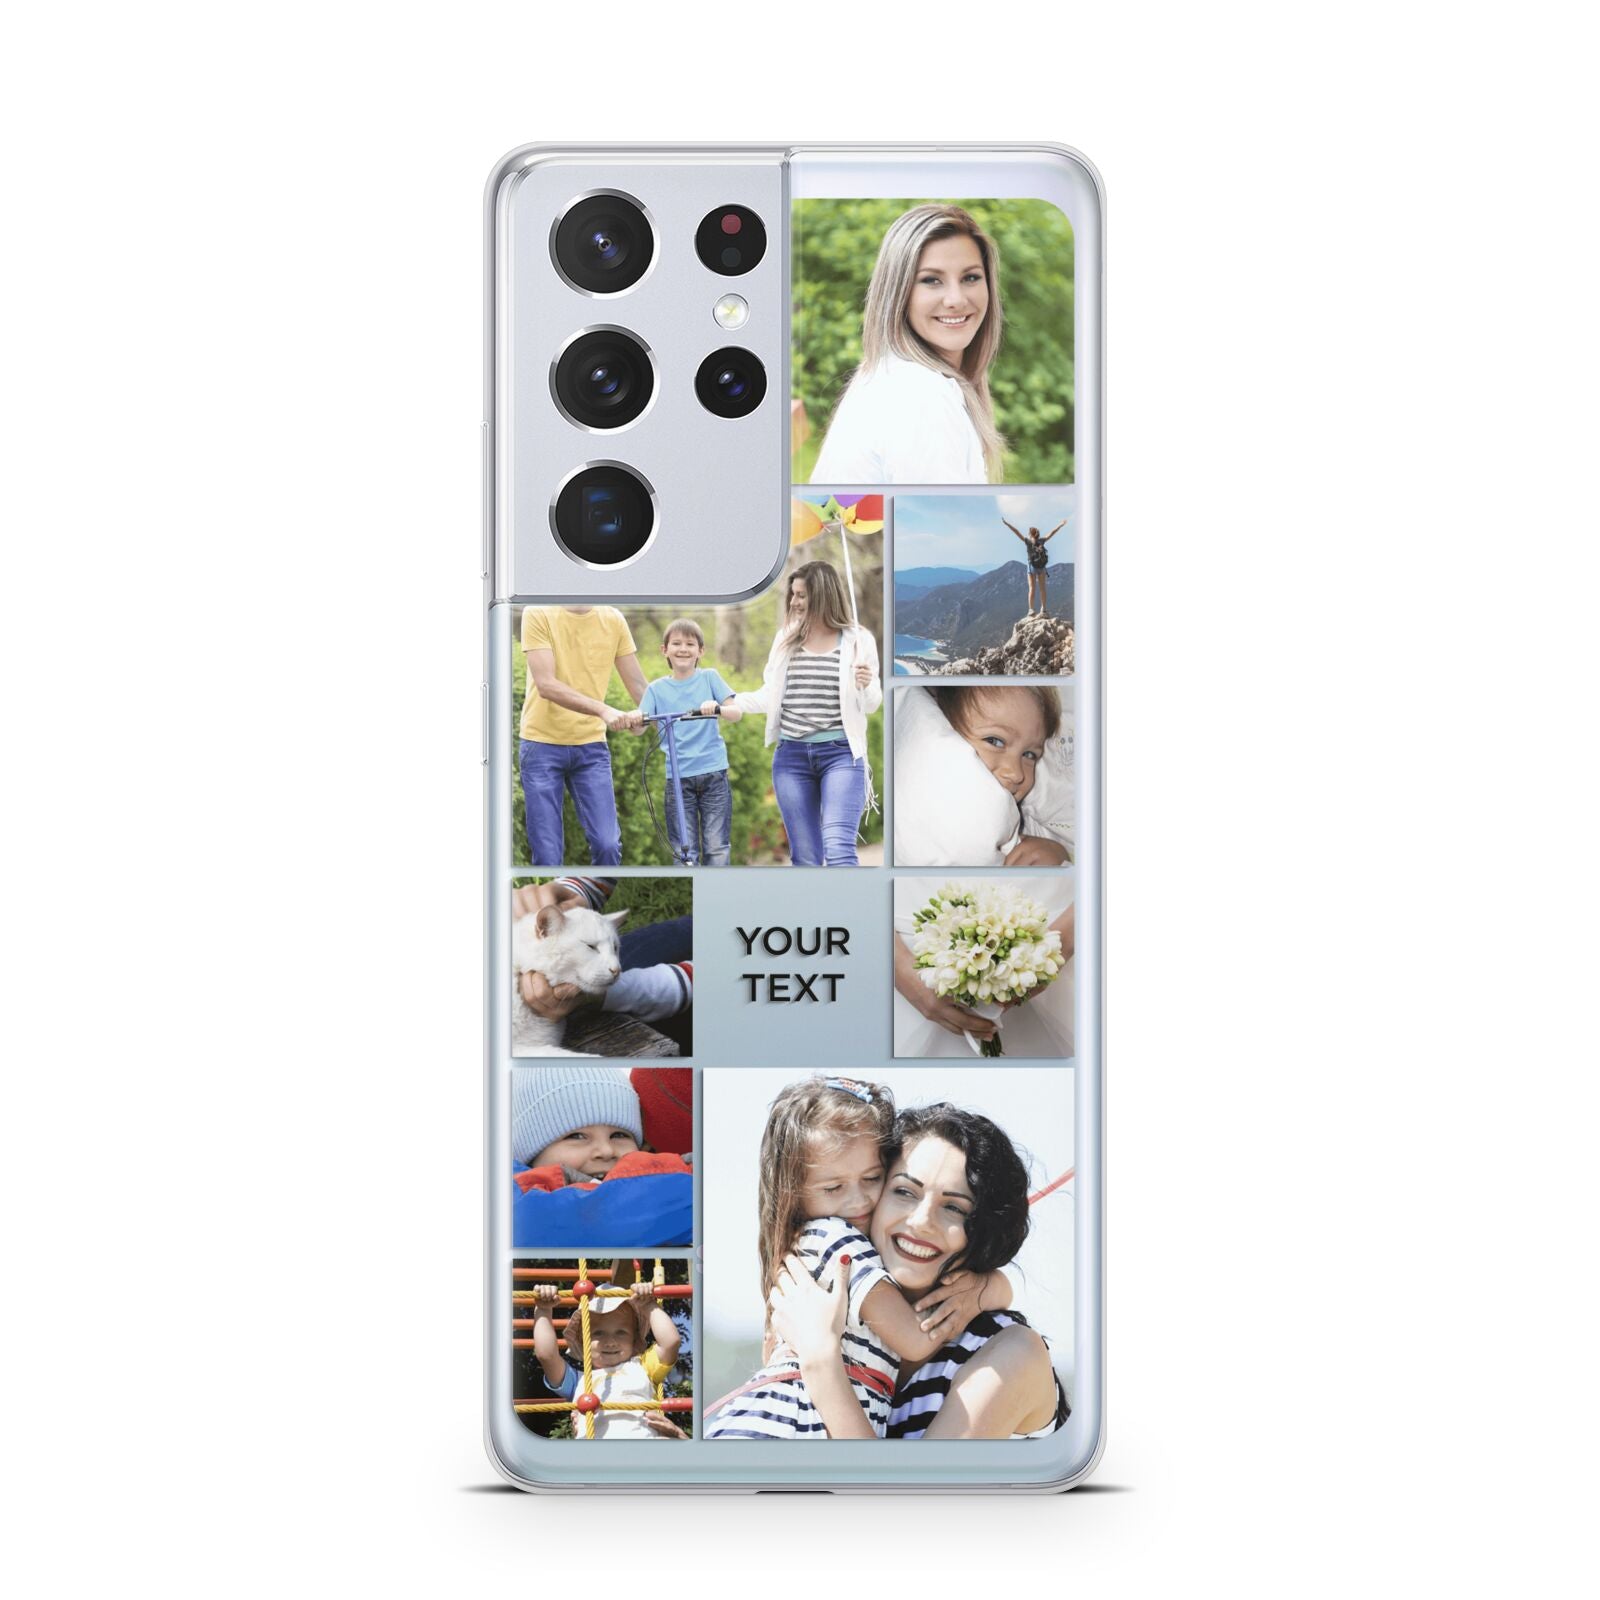 Personalised Photo Grid Samsung S21 Ultra Case